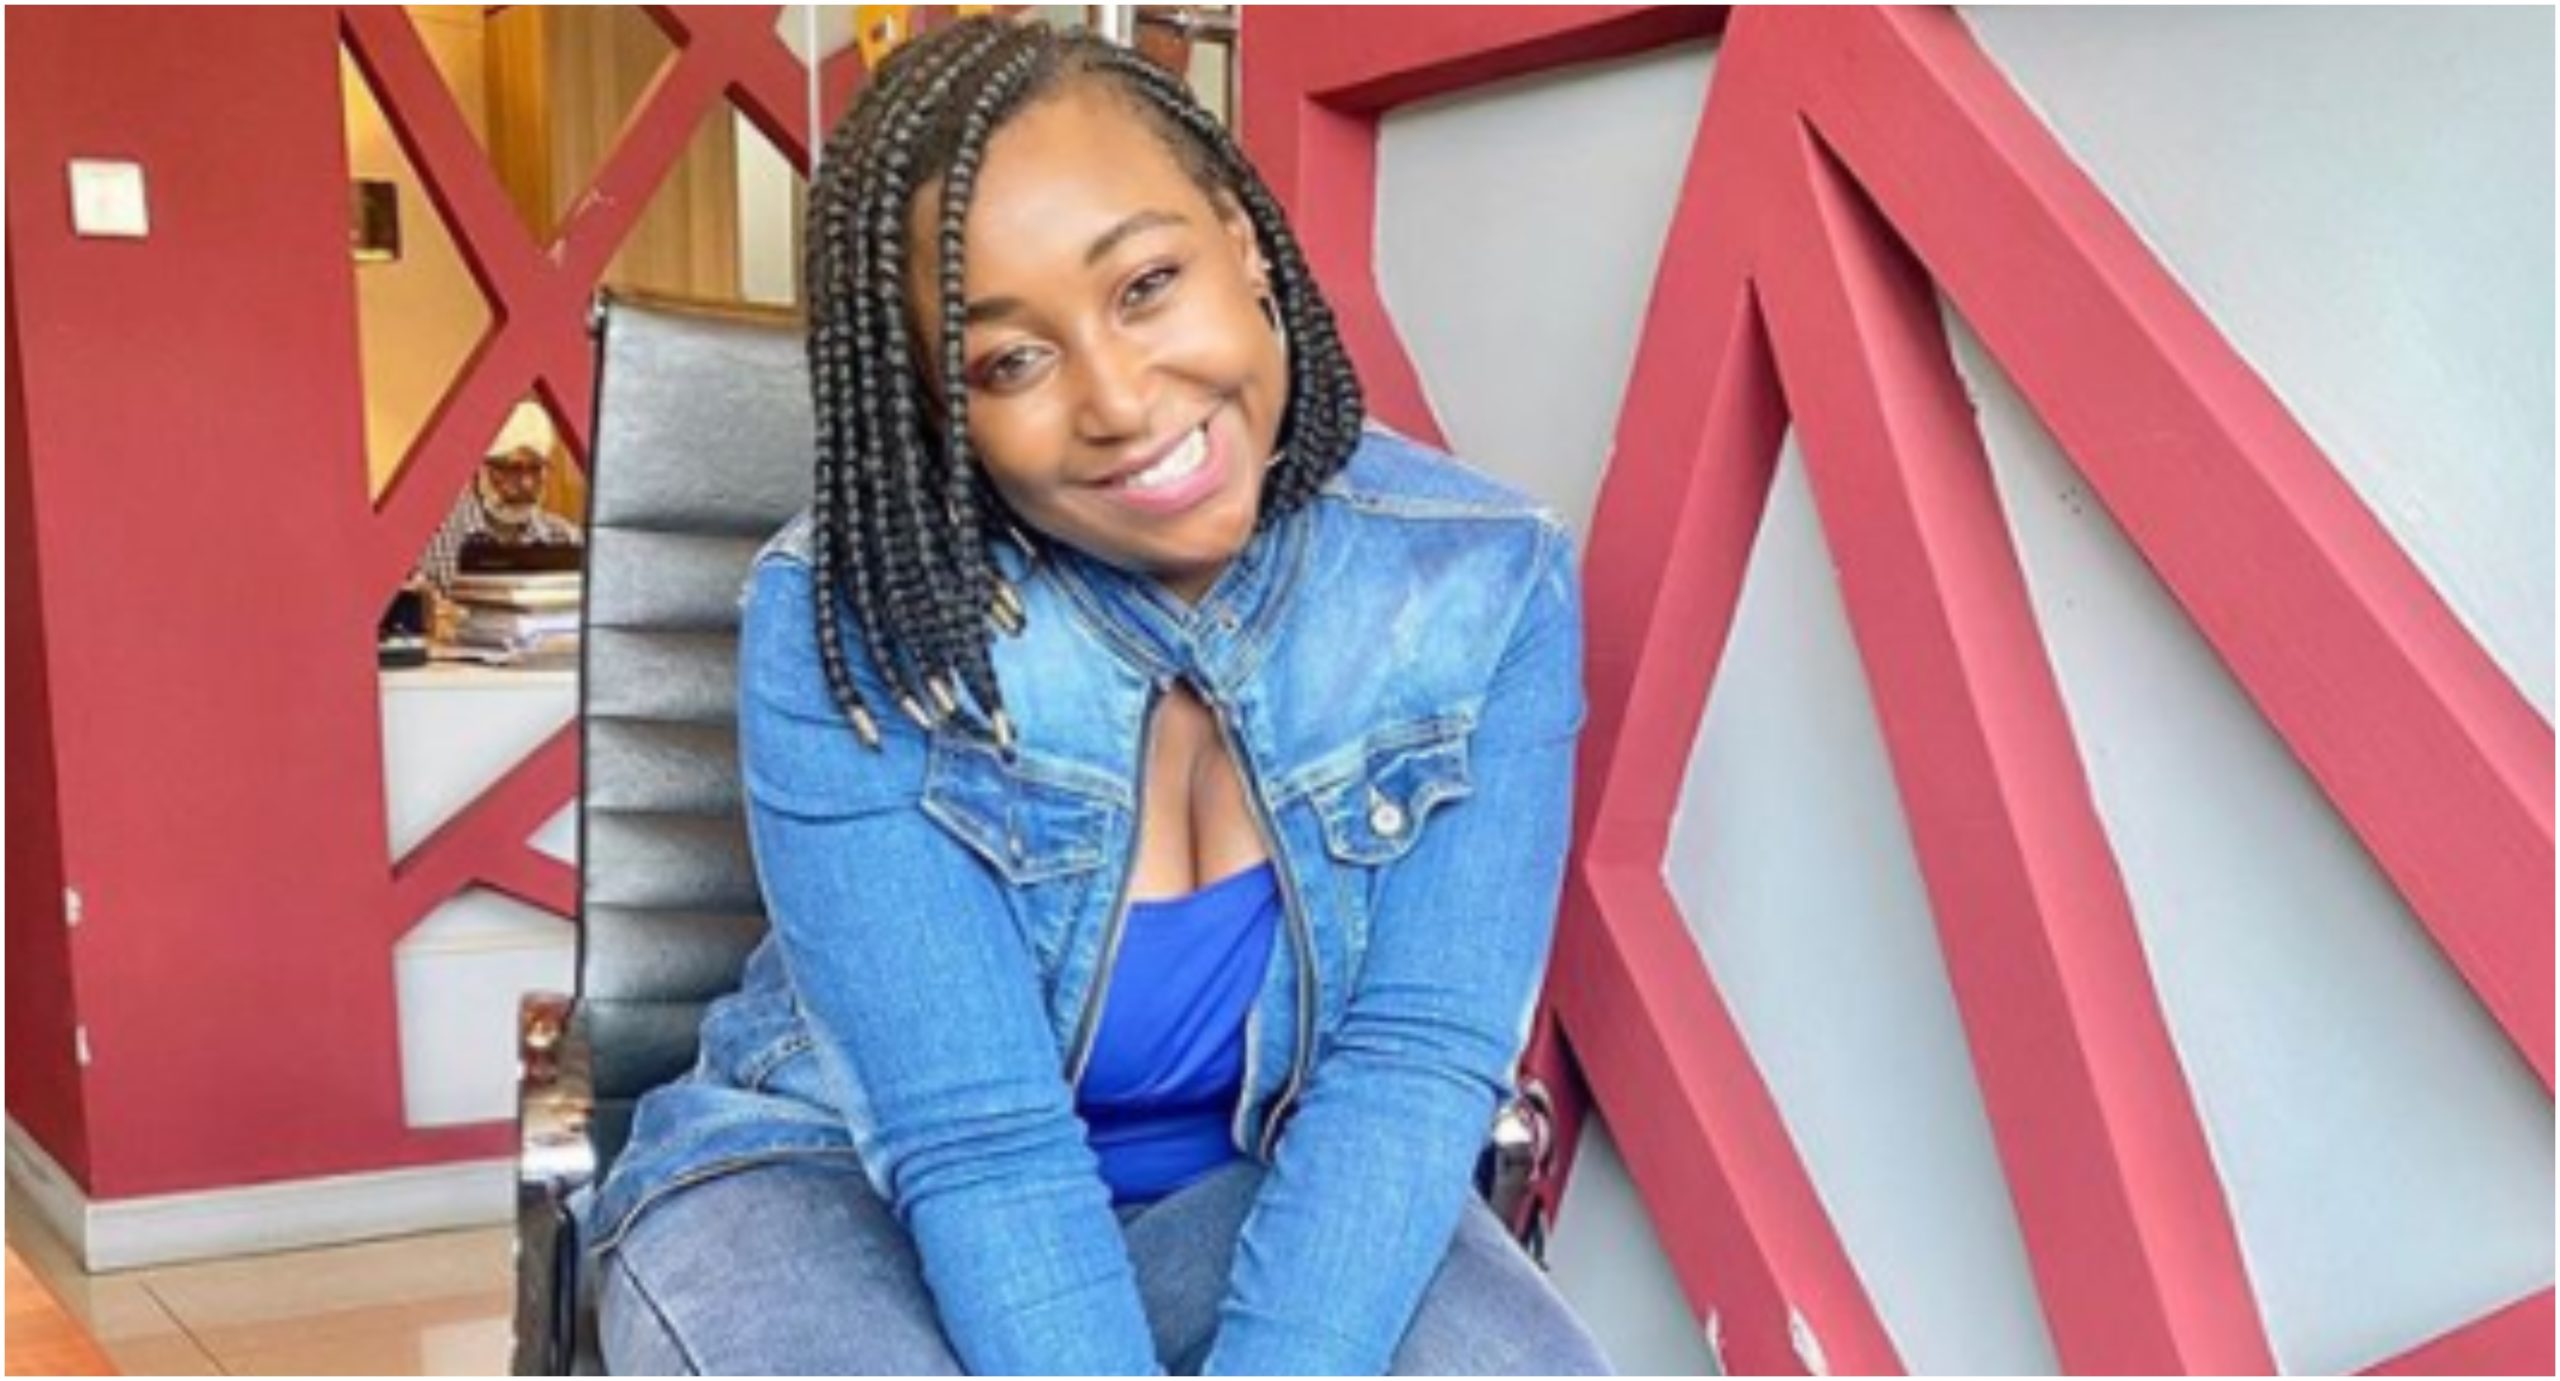 Betty Kyallo’s new skimpy outfits causing a buzz online